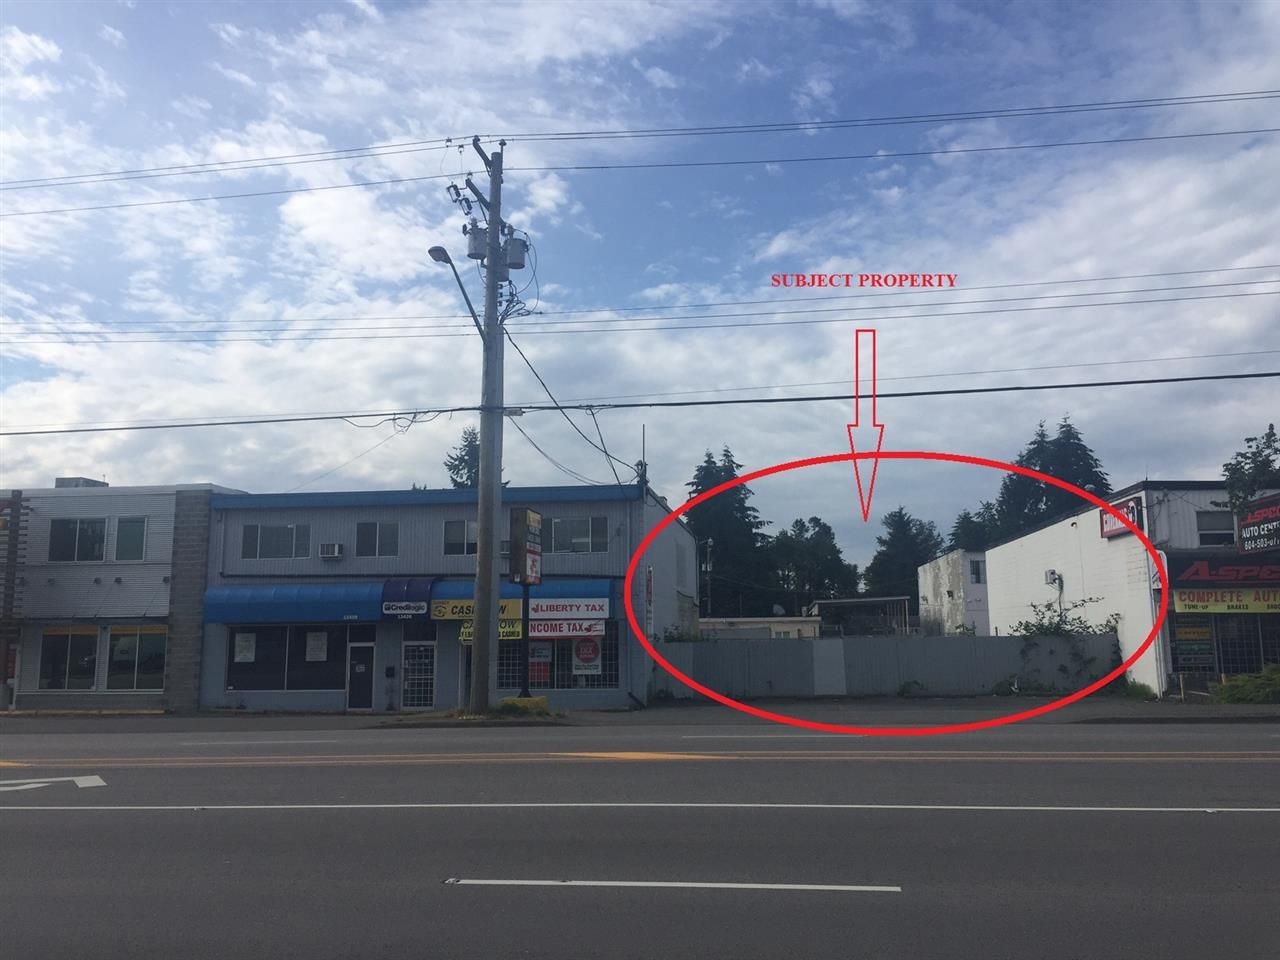 Main Photo: 13414 72 AVENUE in Surrey: Land Commercial for sale : MLS®# C8006759